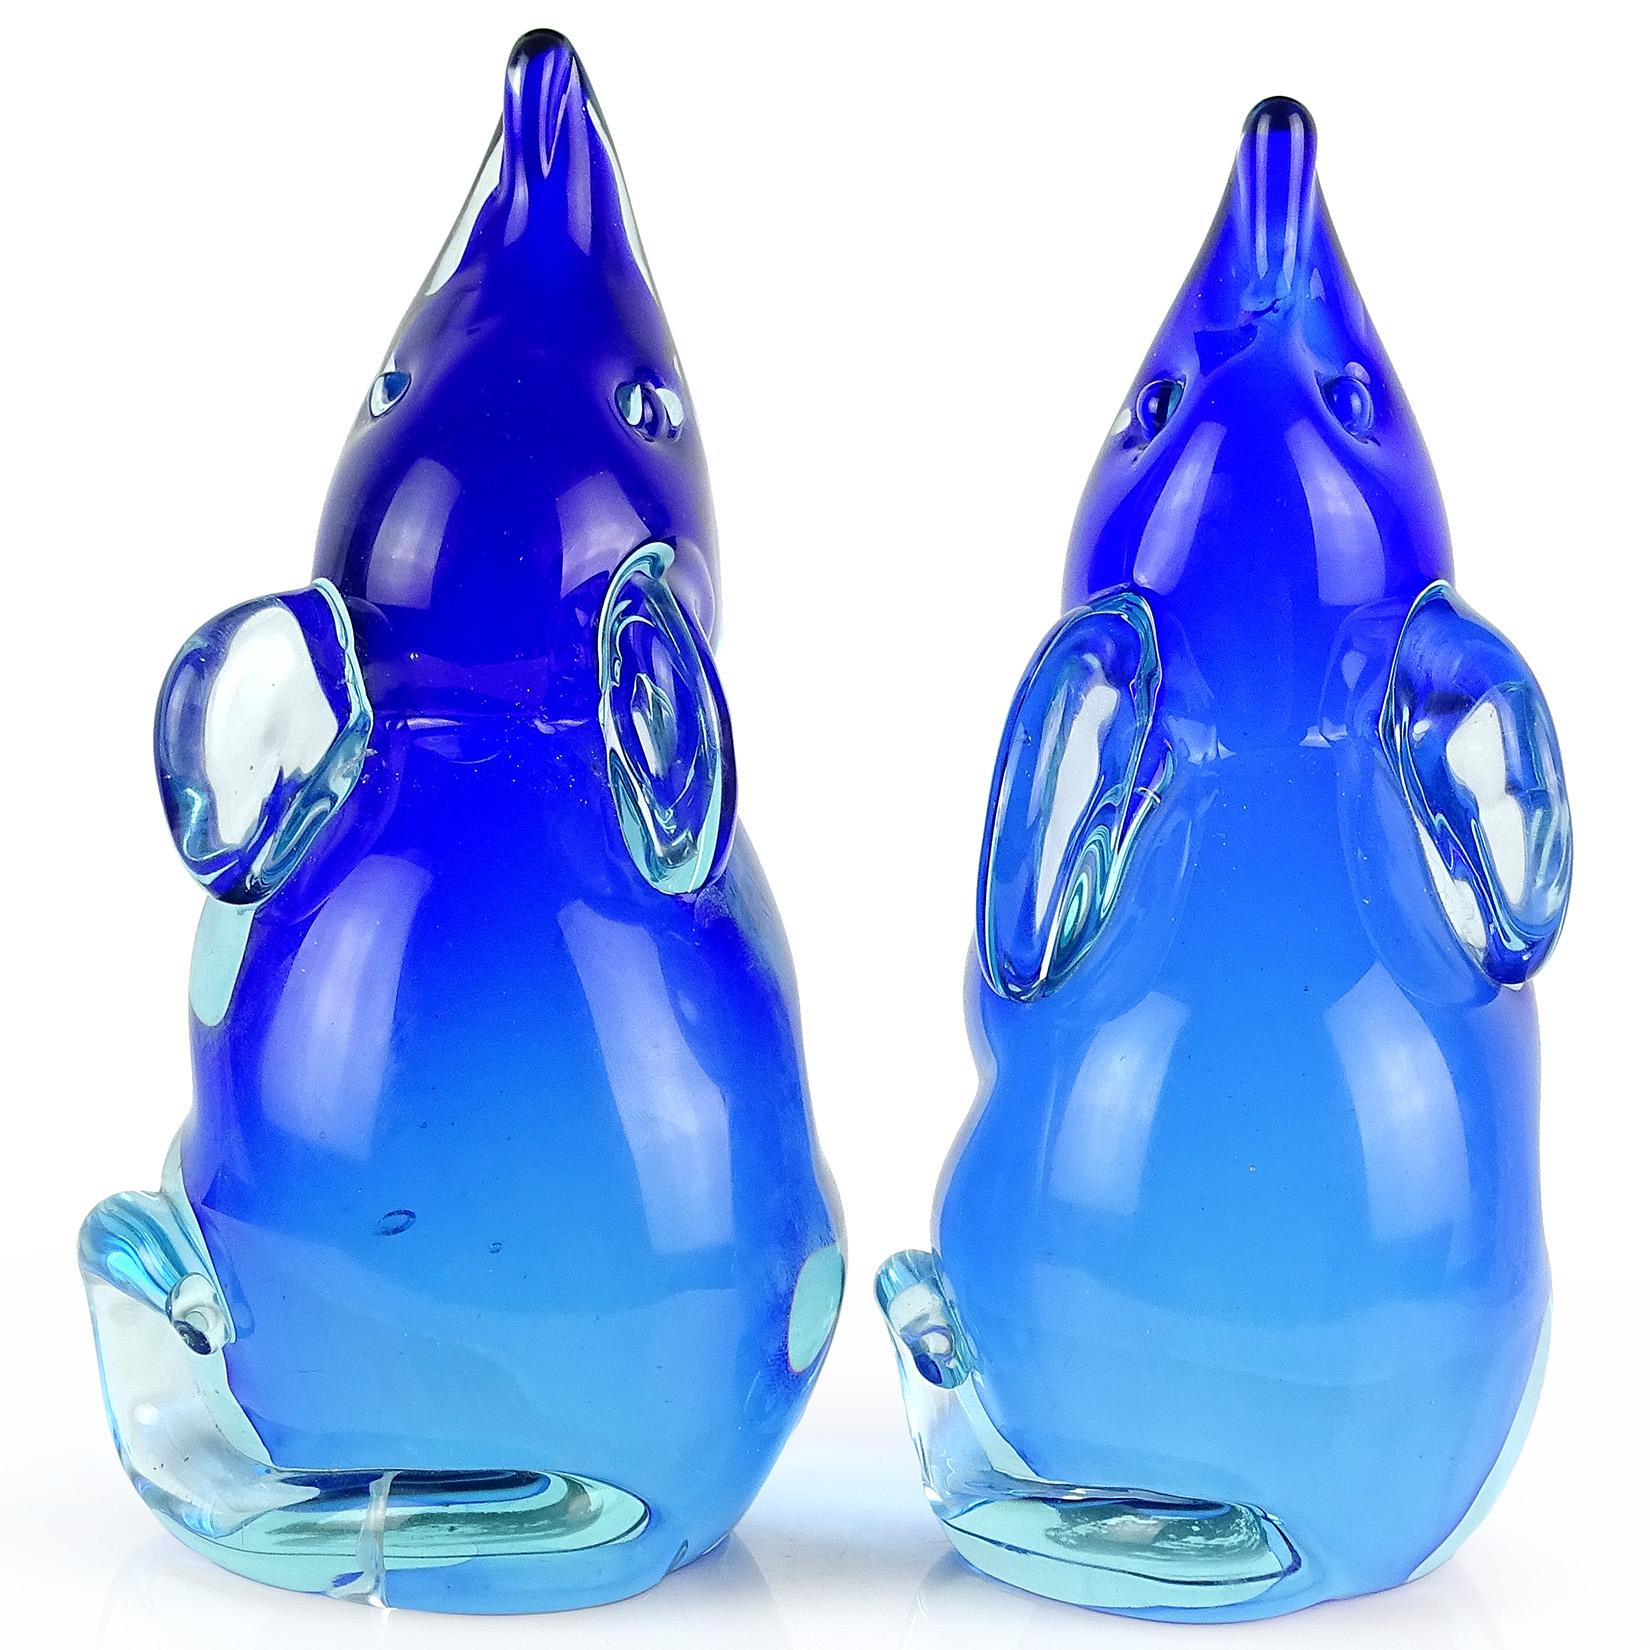 Beautiful Murano cobalt blue Sommerso Italian art glass figural mouse bookends. Documented to designer Archimede Seguso, with original labels still attached. Gorgeous color and super cute. Tallest is 6 3/4